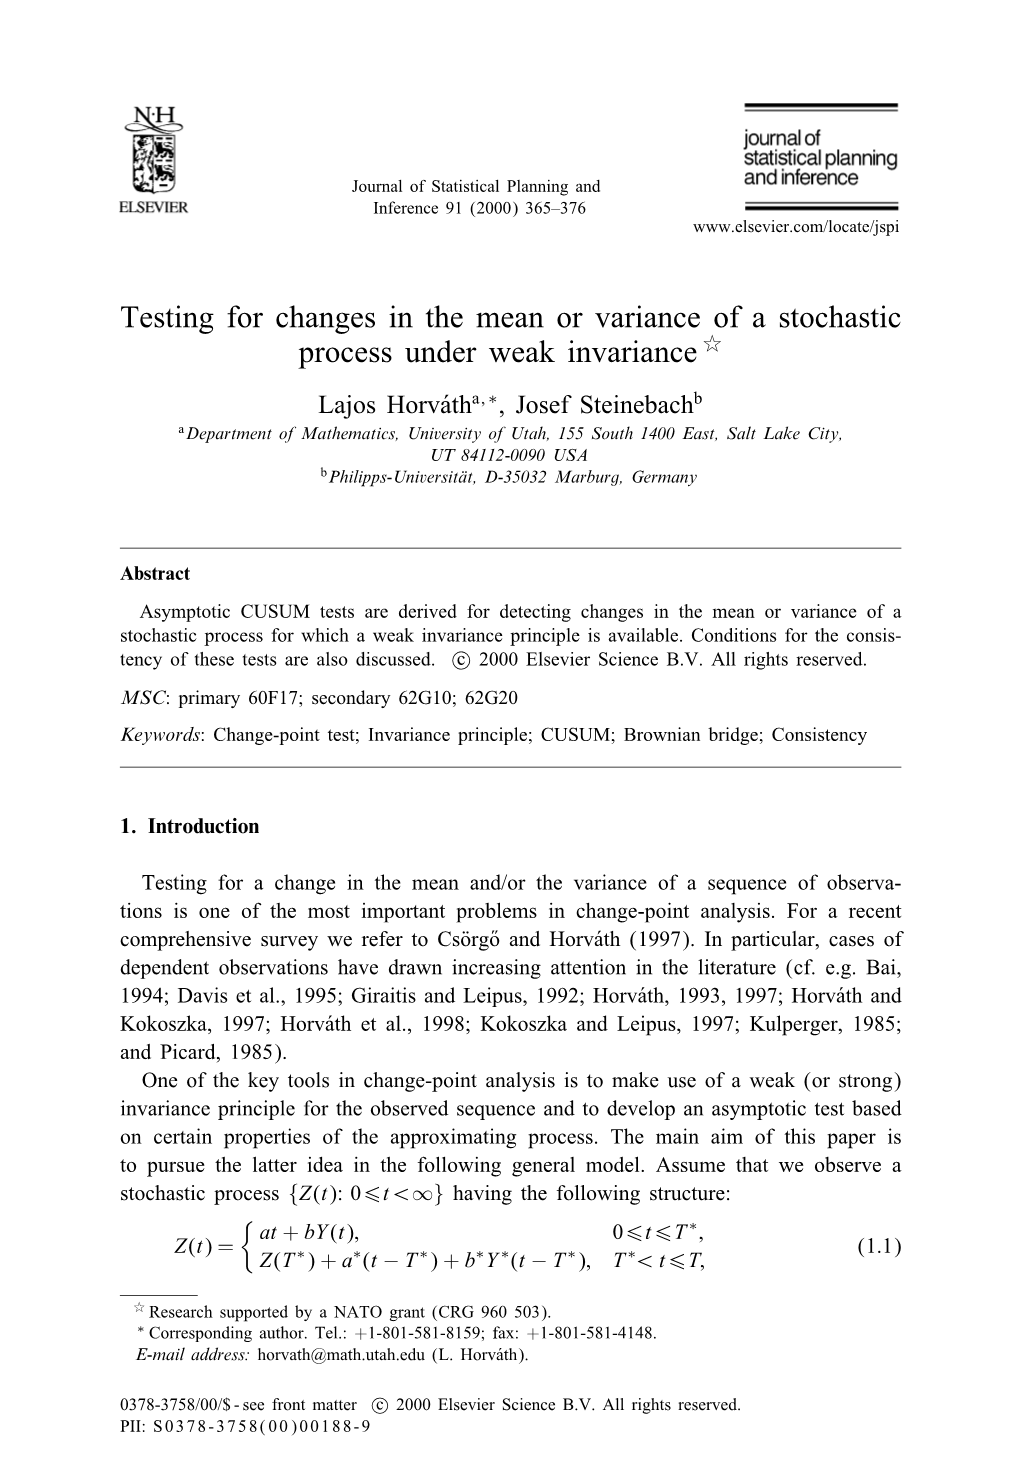 Testing for Changes in the Mean Or Variance of a Stochastic Process